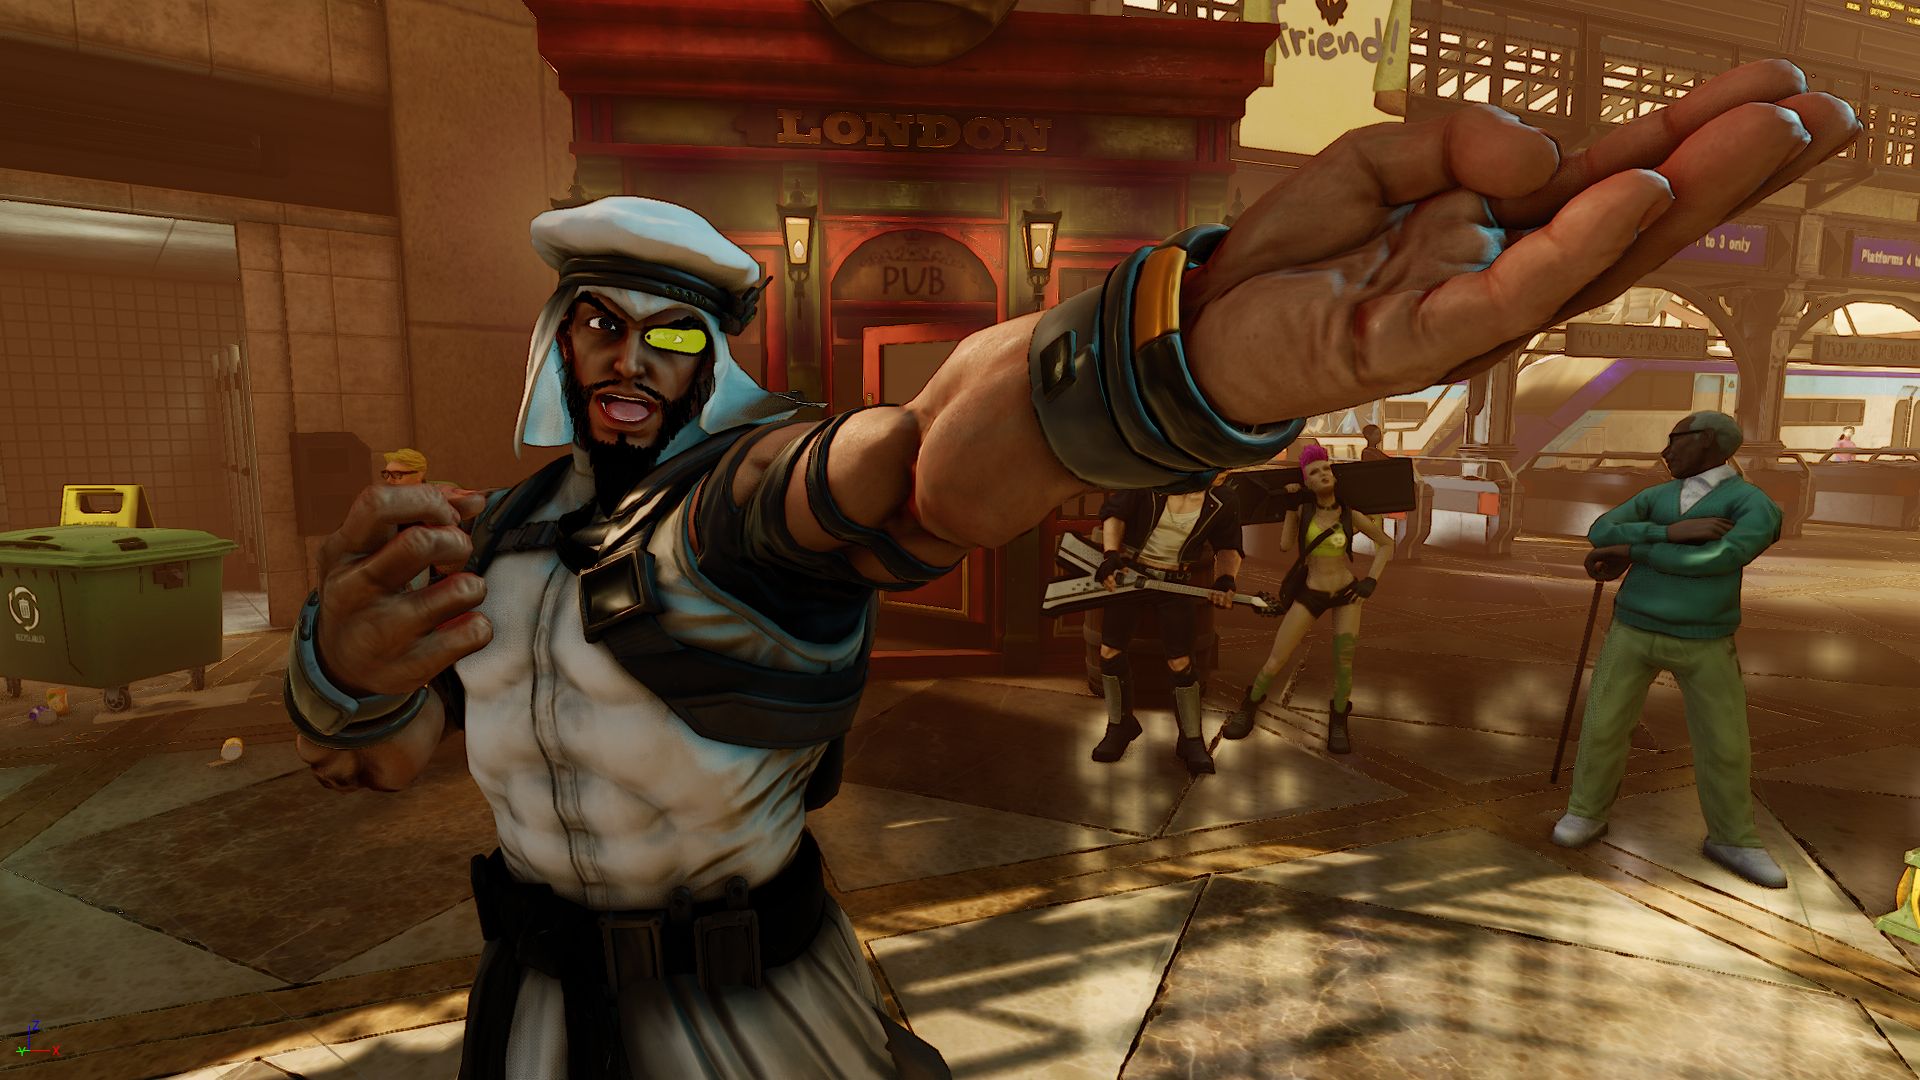 Street Fighter V: The SceneGeek Review